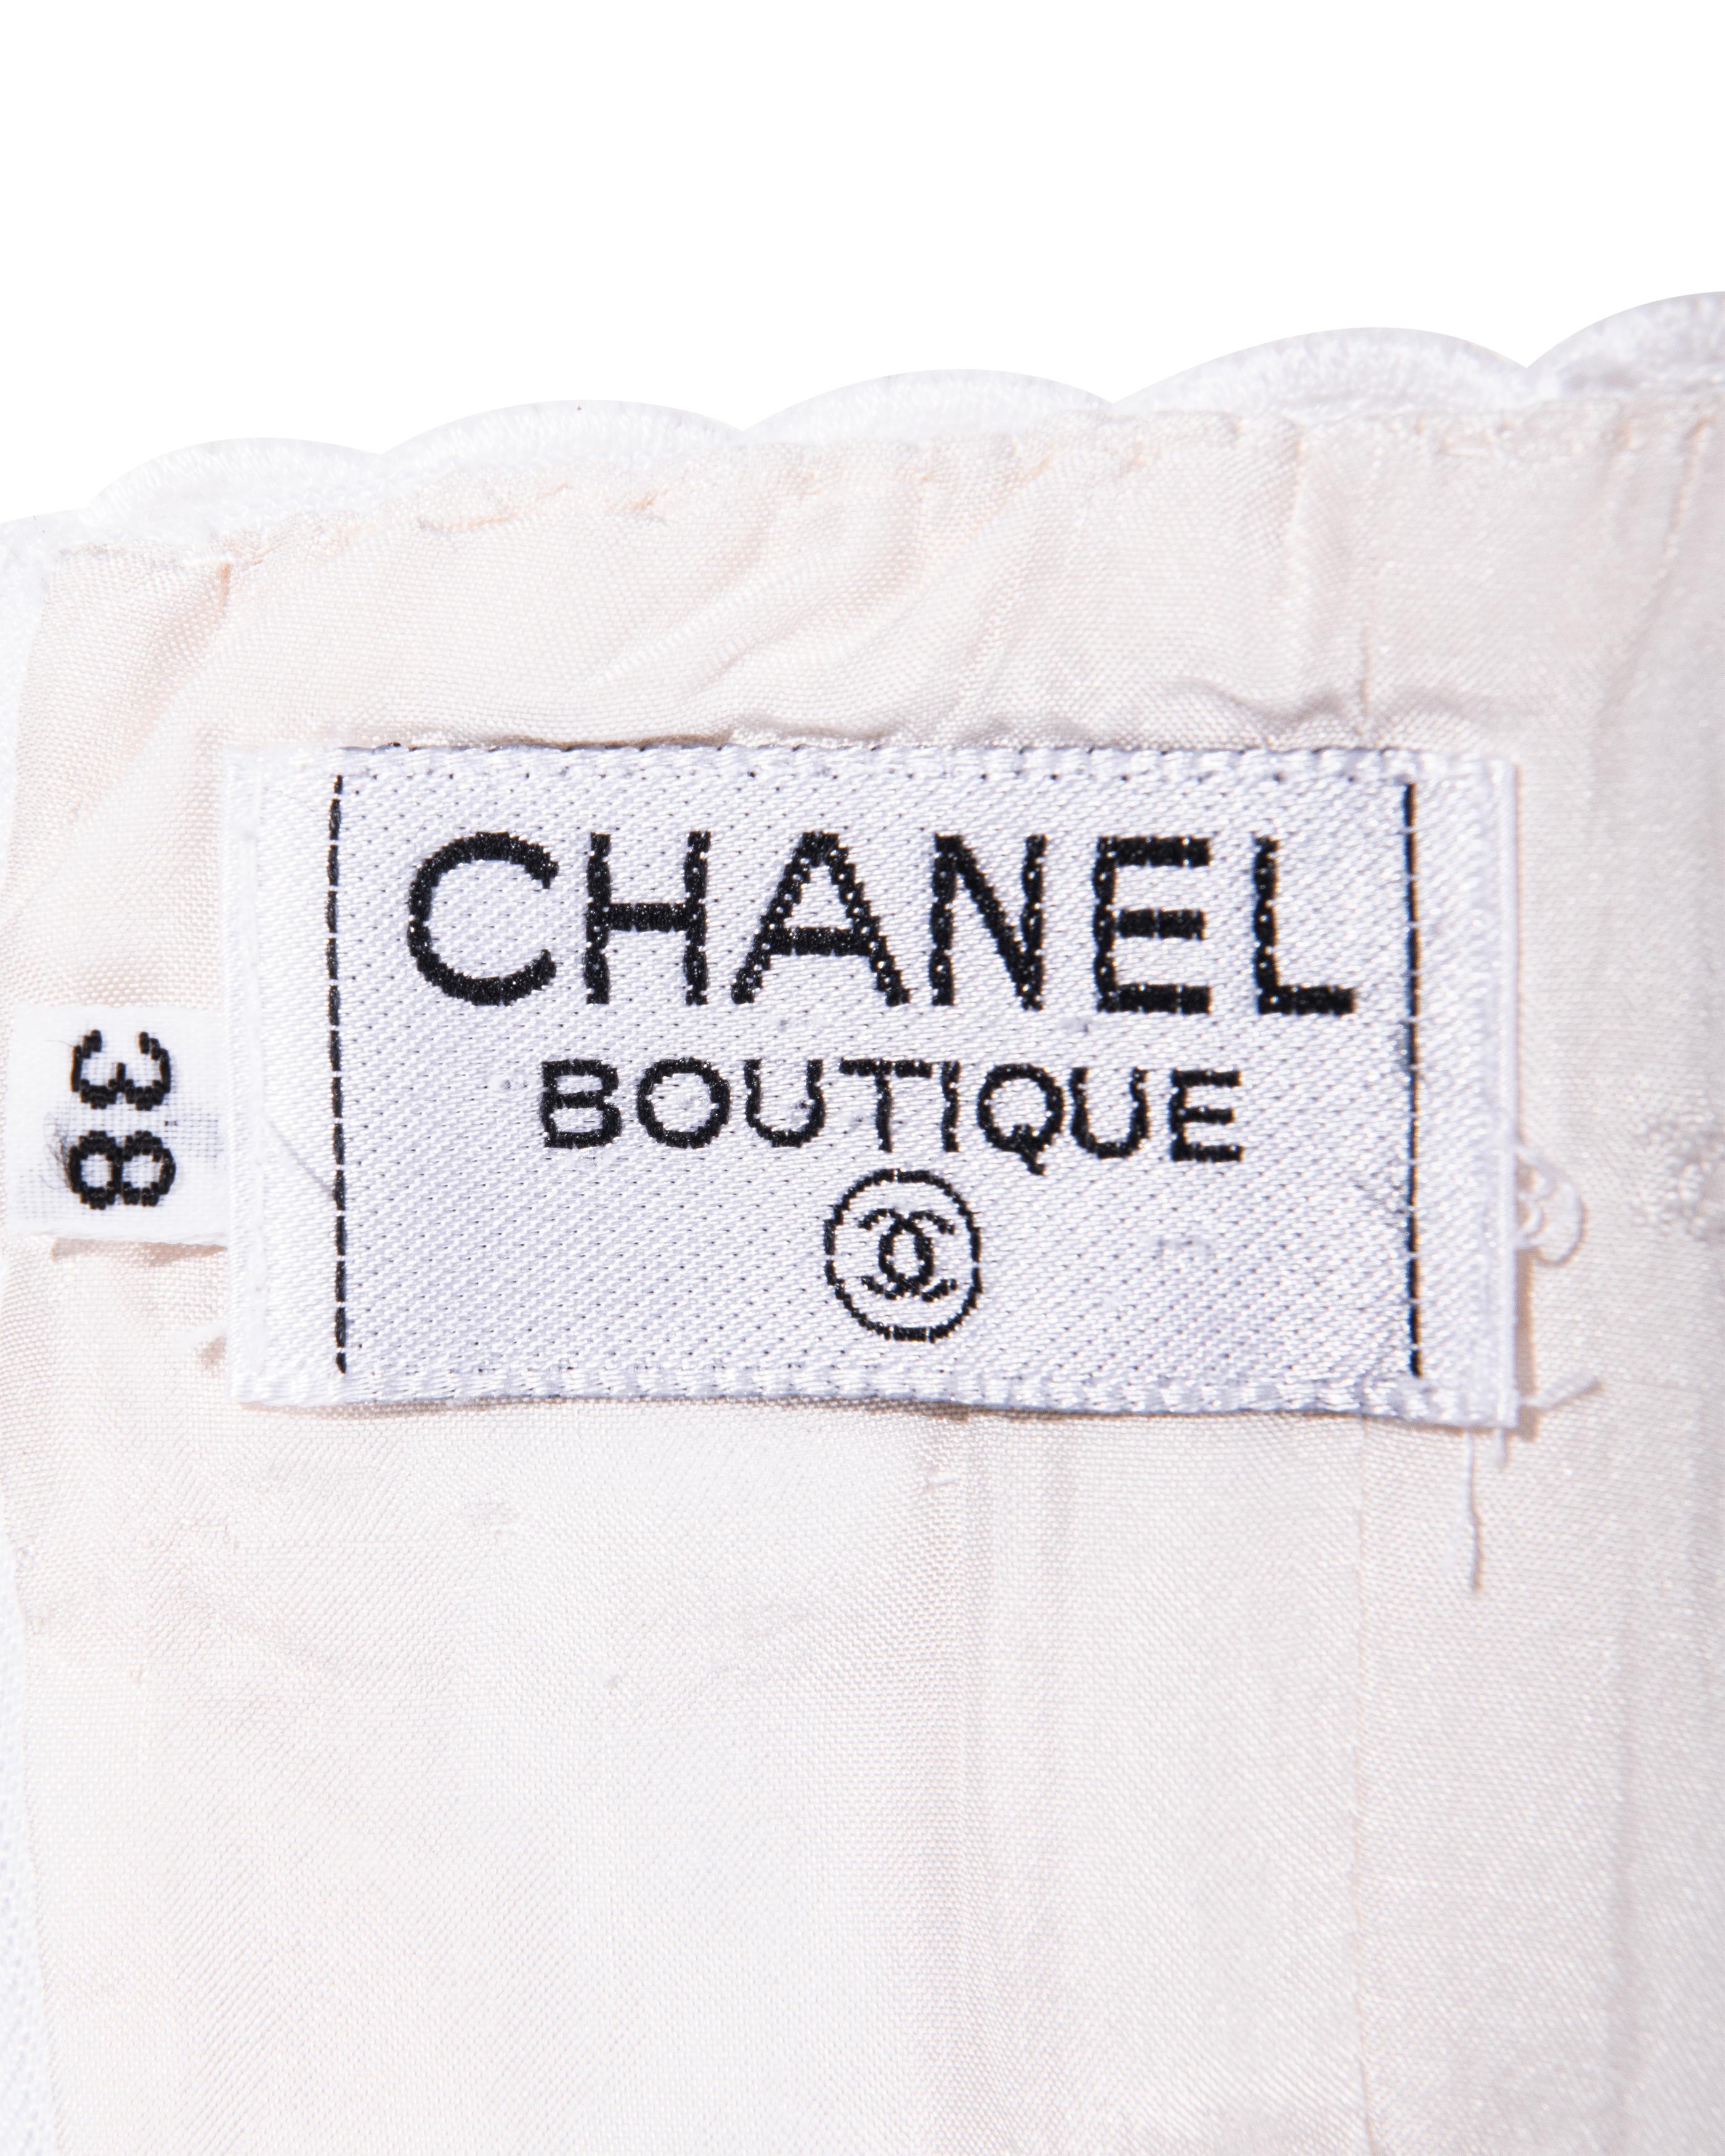 S/S 1993 Chanel by Karl Lagerfeld White Strapless Corset 3